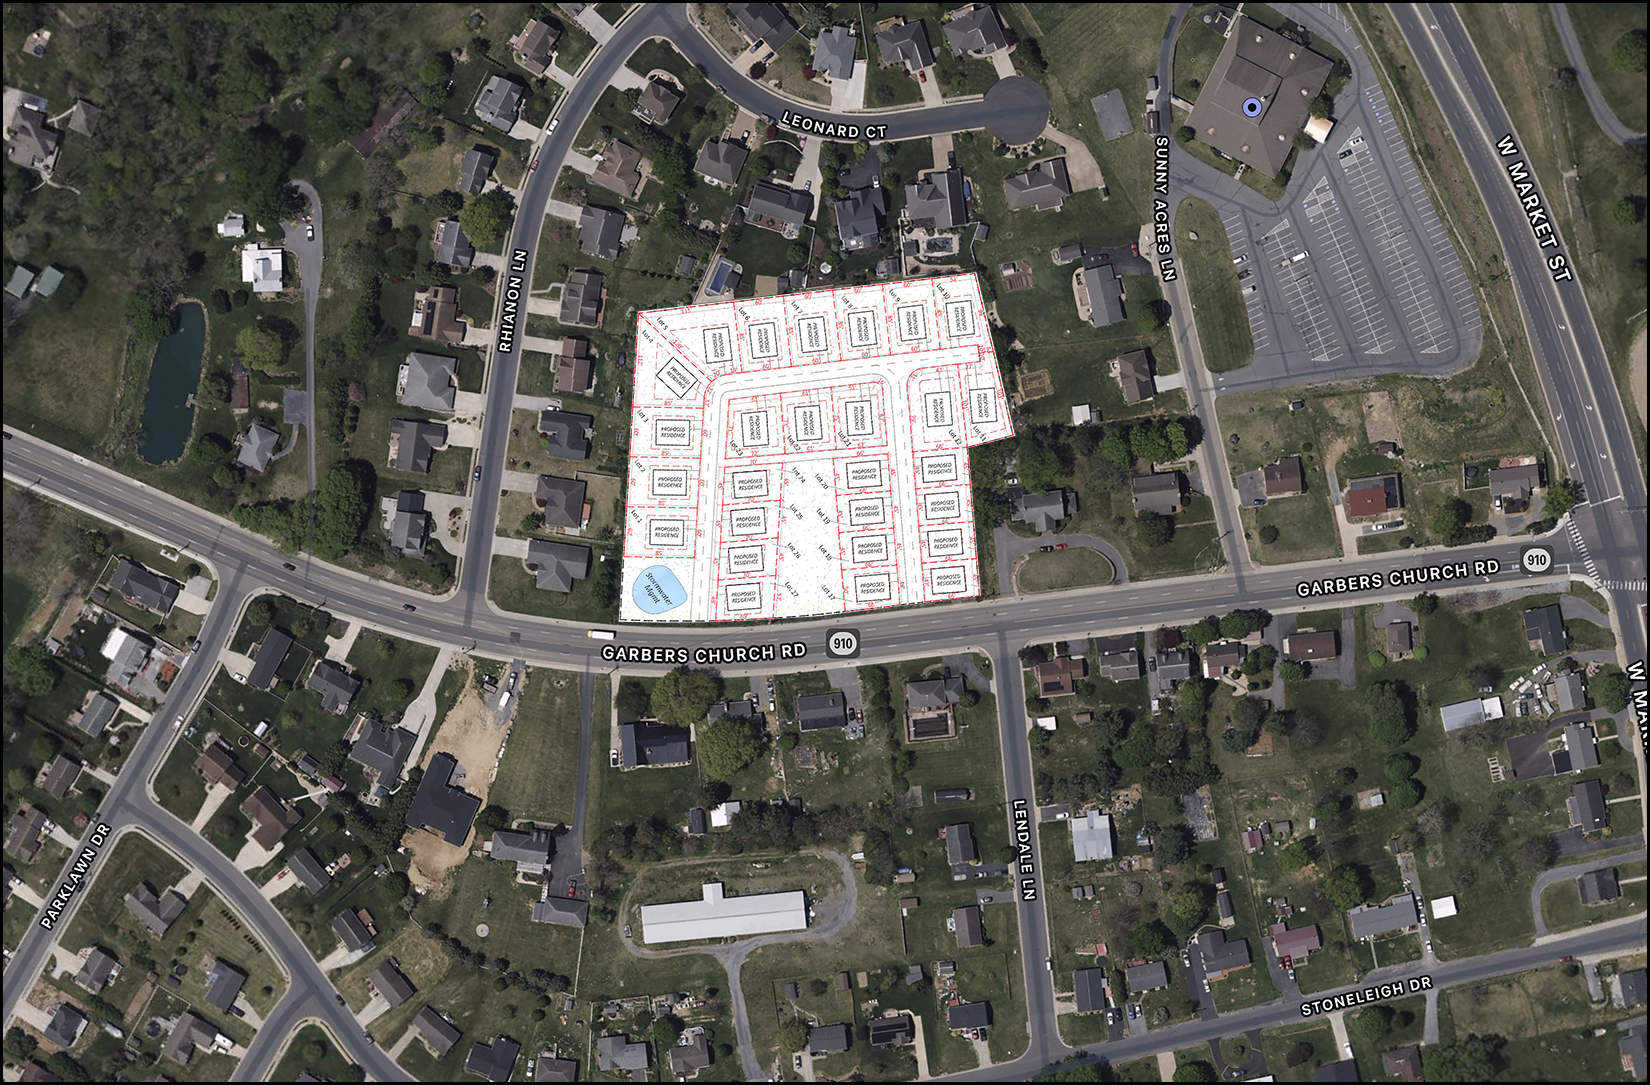 Proposed Development on Garbers Church Road